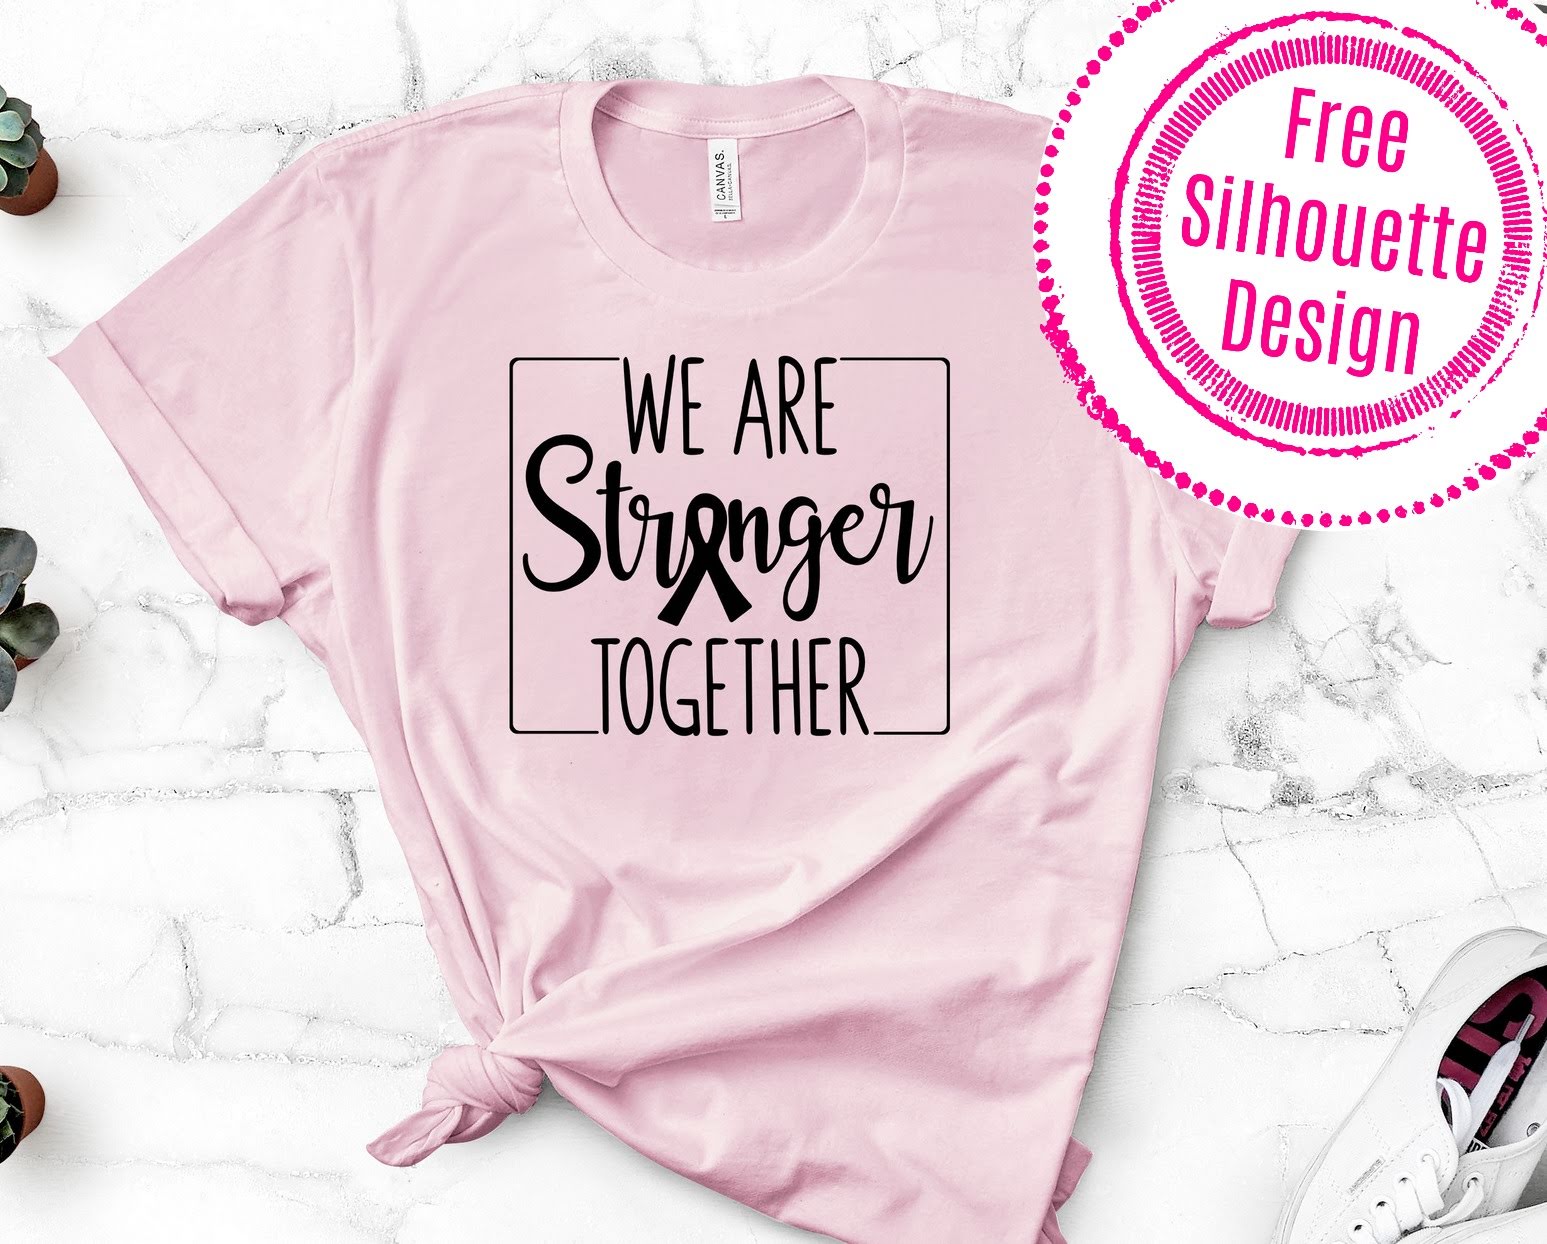 Download Free Silhouette Design Breast Cancer Awareness Silhouette School